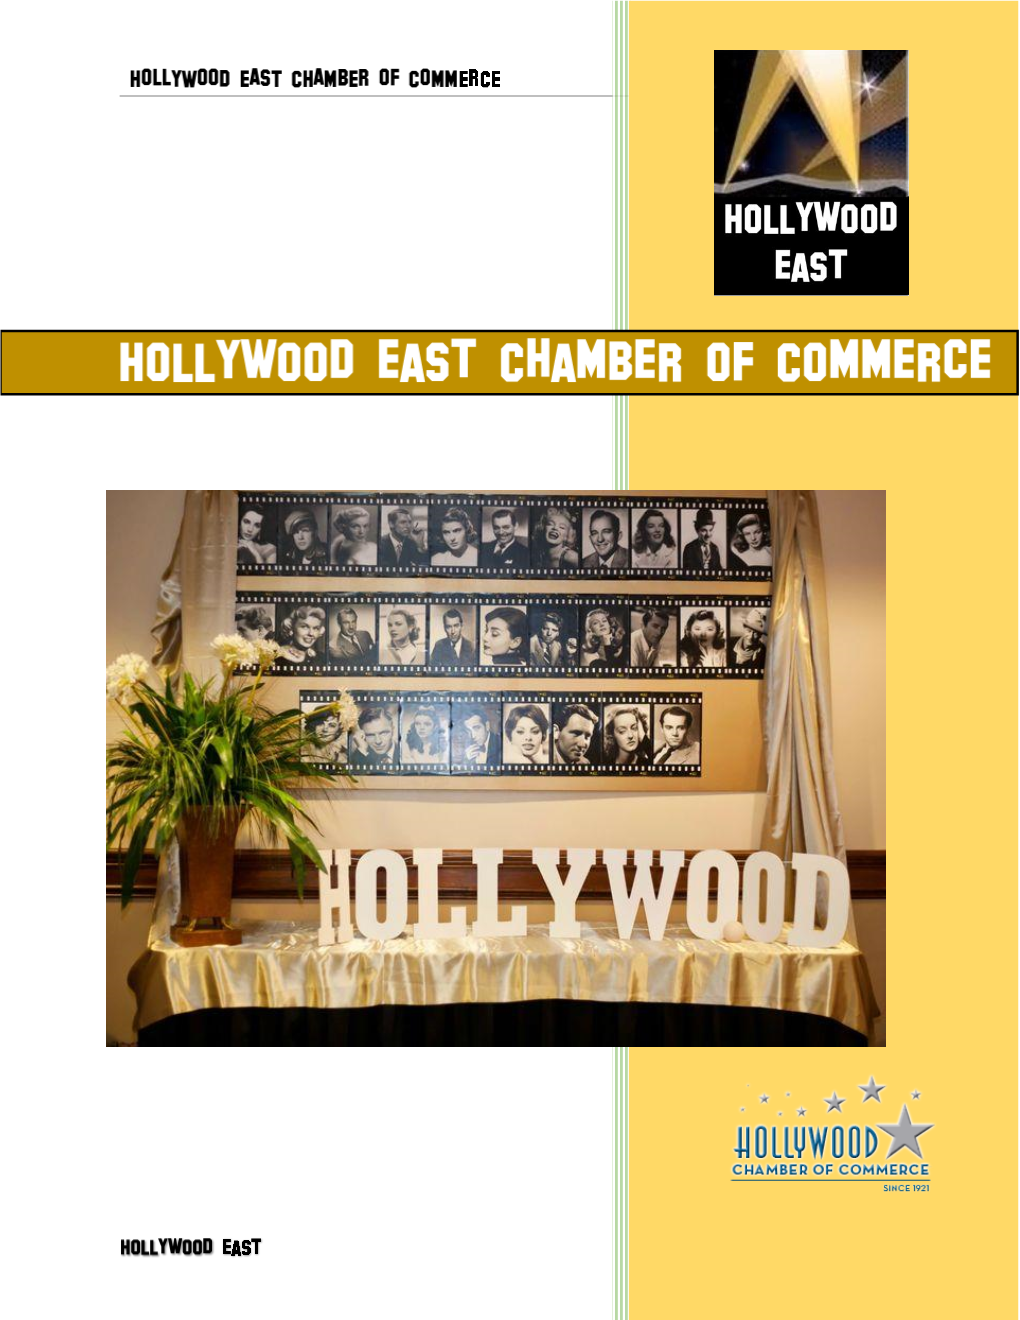 Hollywood EAST Chamber of Commerce